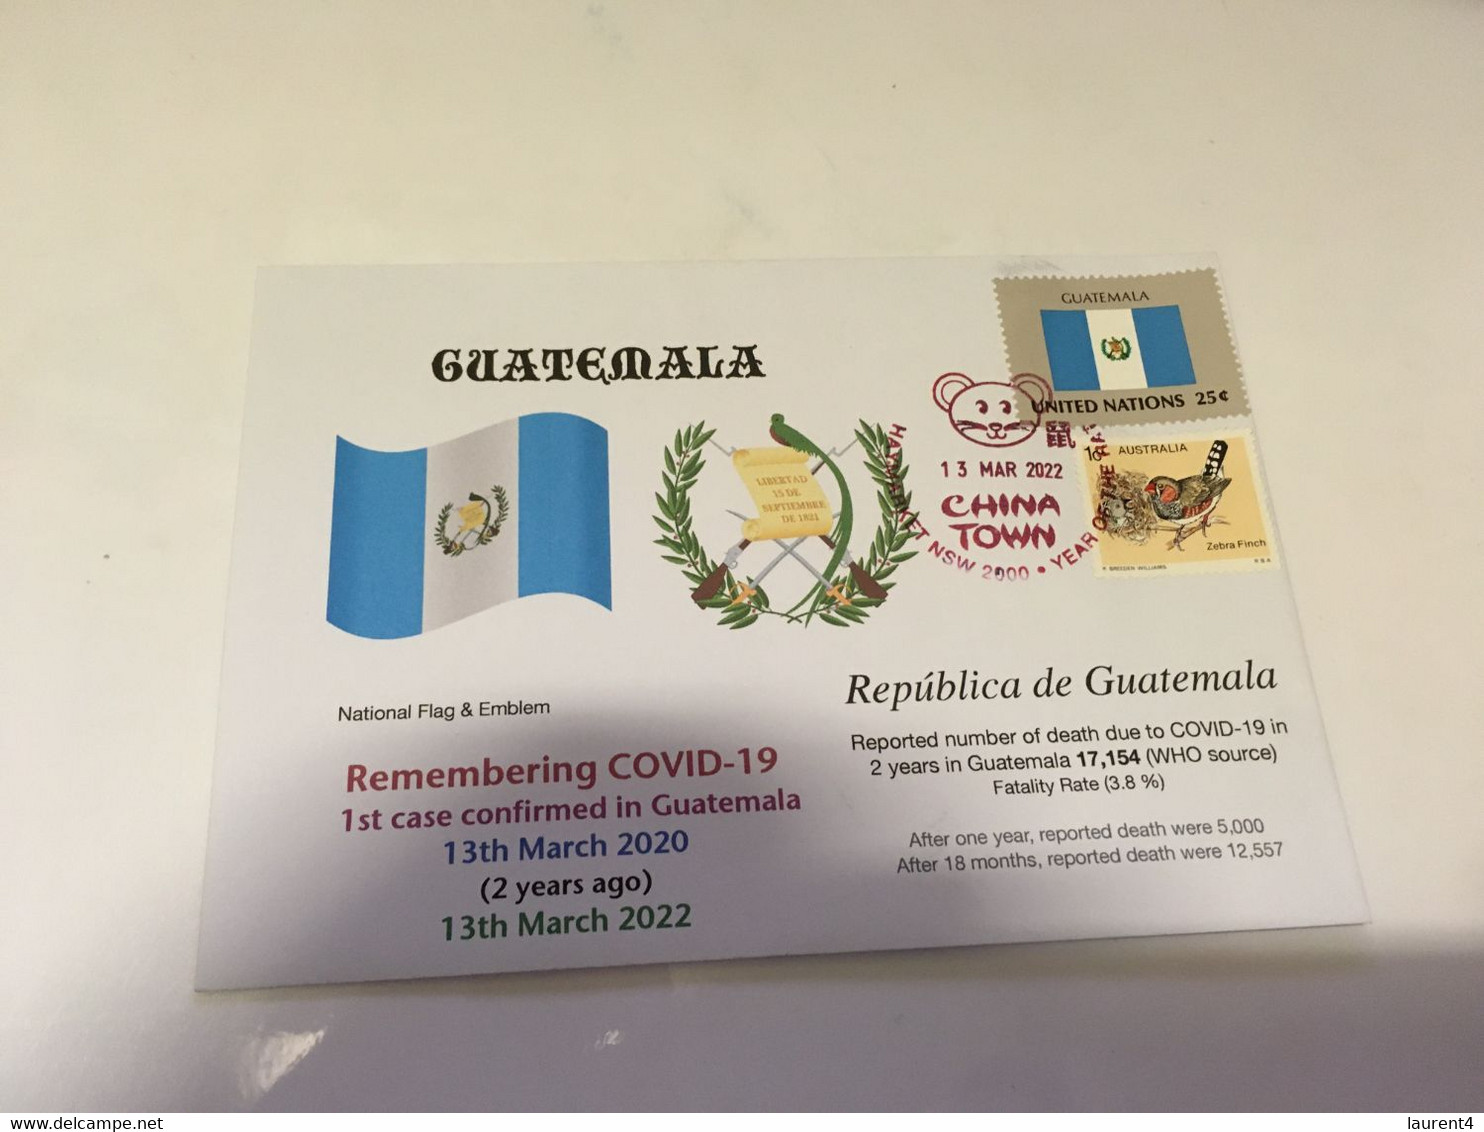 (1 H 22) (Australia) COVID-19 In Guatemala - 2nd Anniversary (cover Guatemala Flag Stamp) Dated 13th March 2022 - Disease